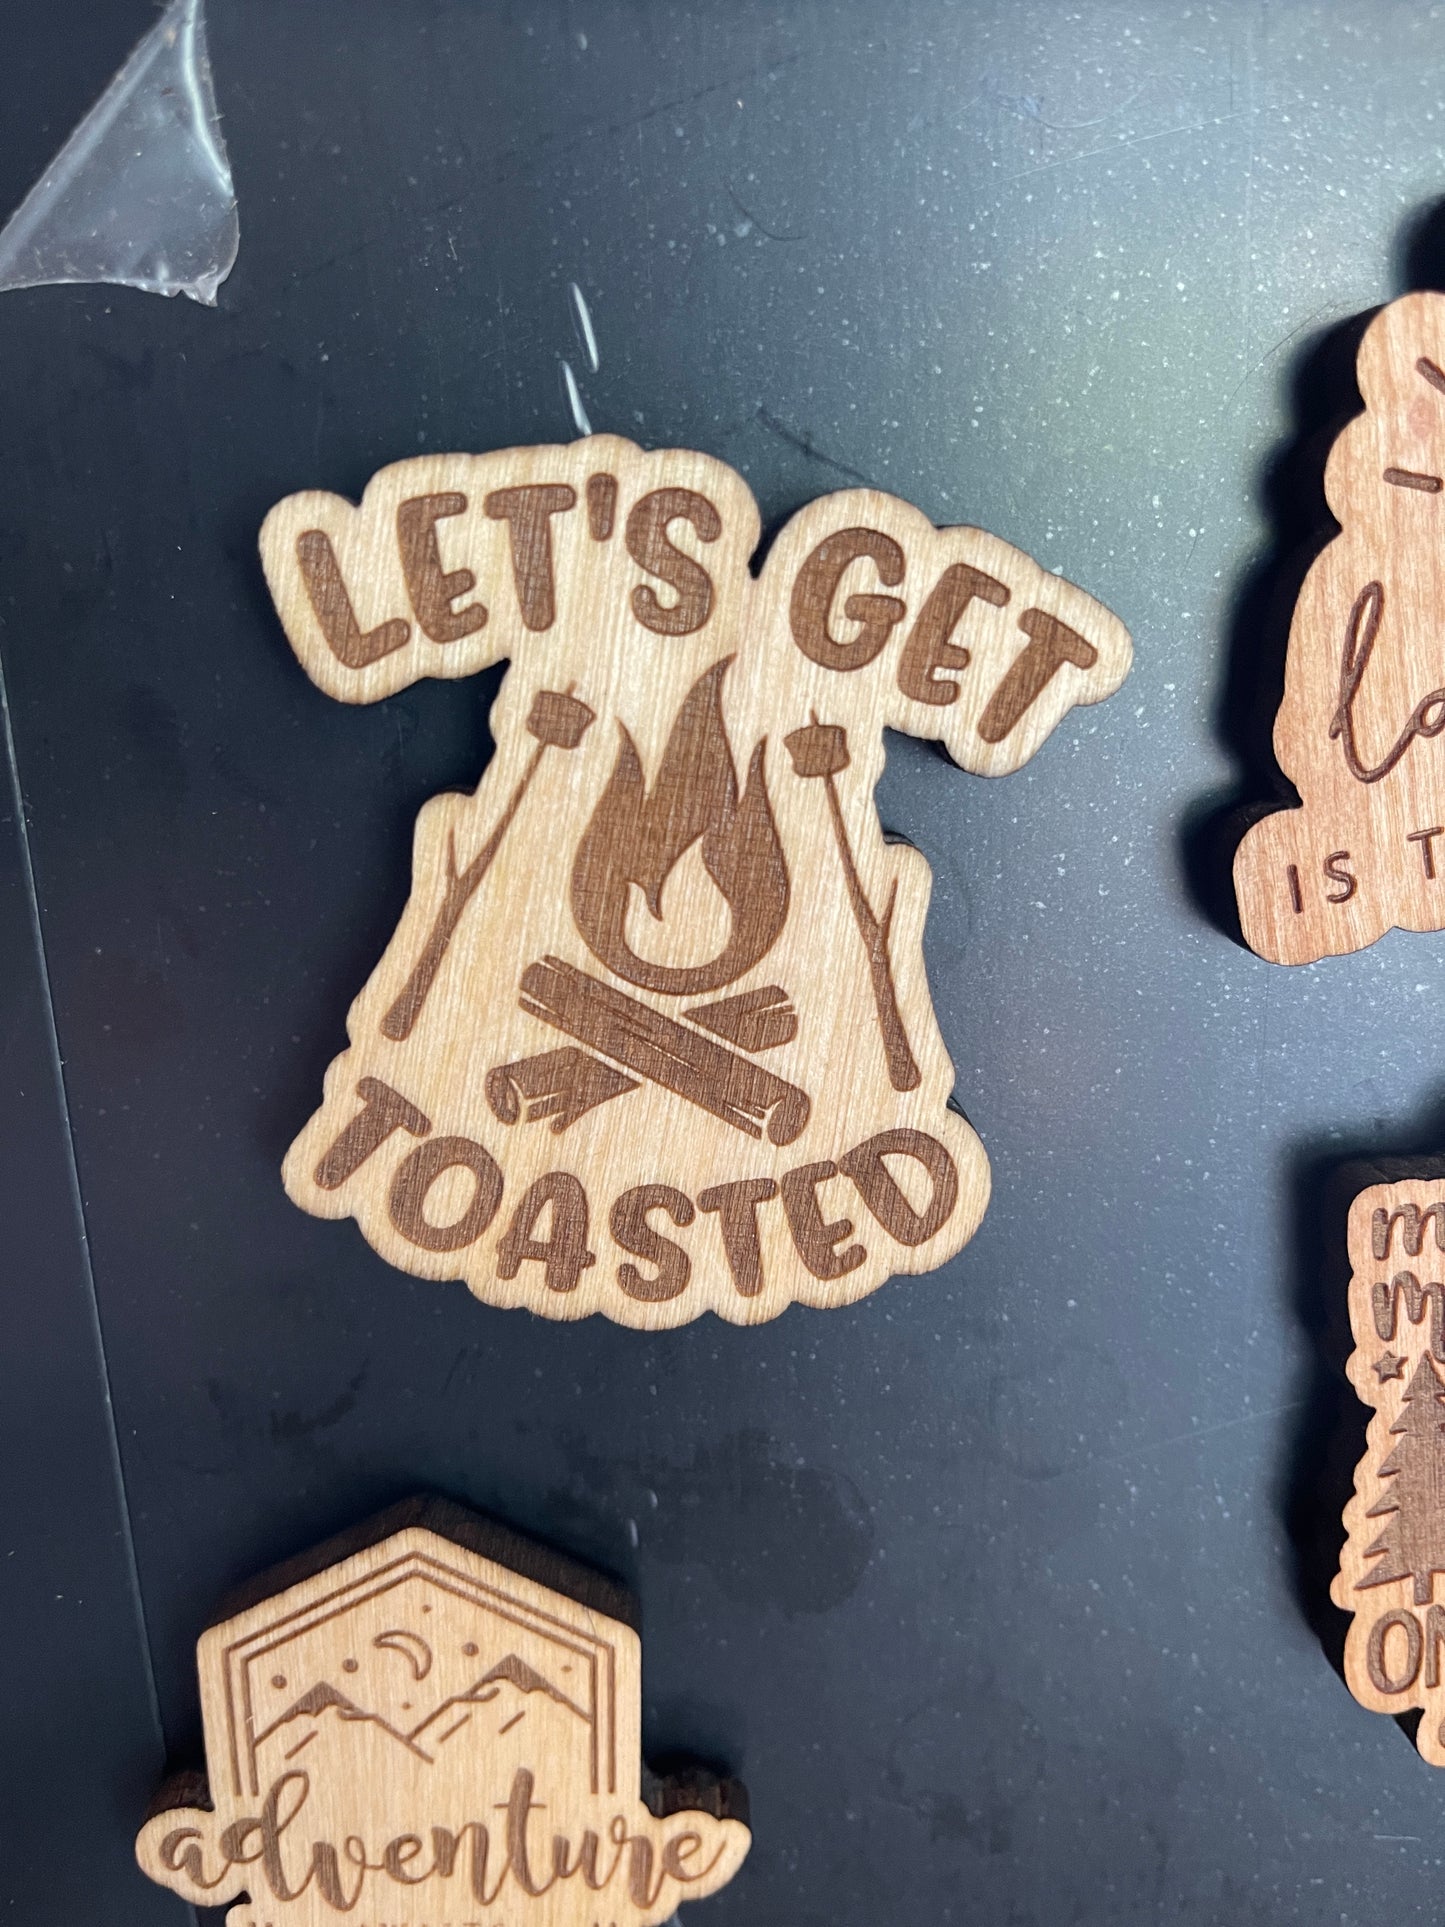 Camping themed fridge magnets